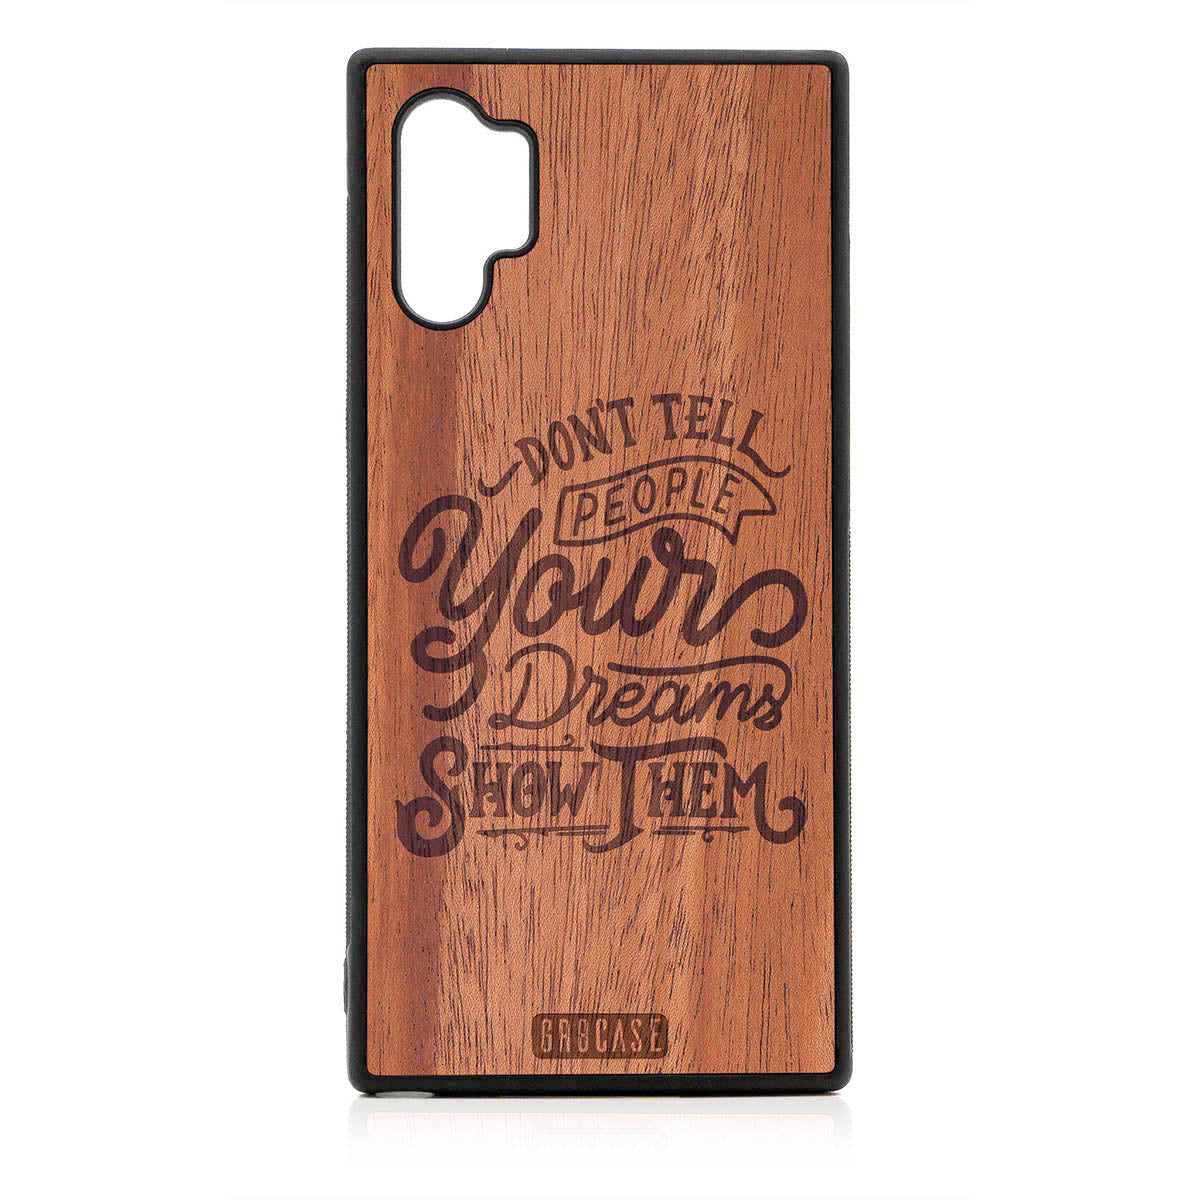 Don't Tell People Your Dreams Show Them Design Wood Case For Samsung Galaxy Note 10 Plus by GR8CASE